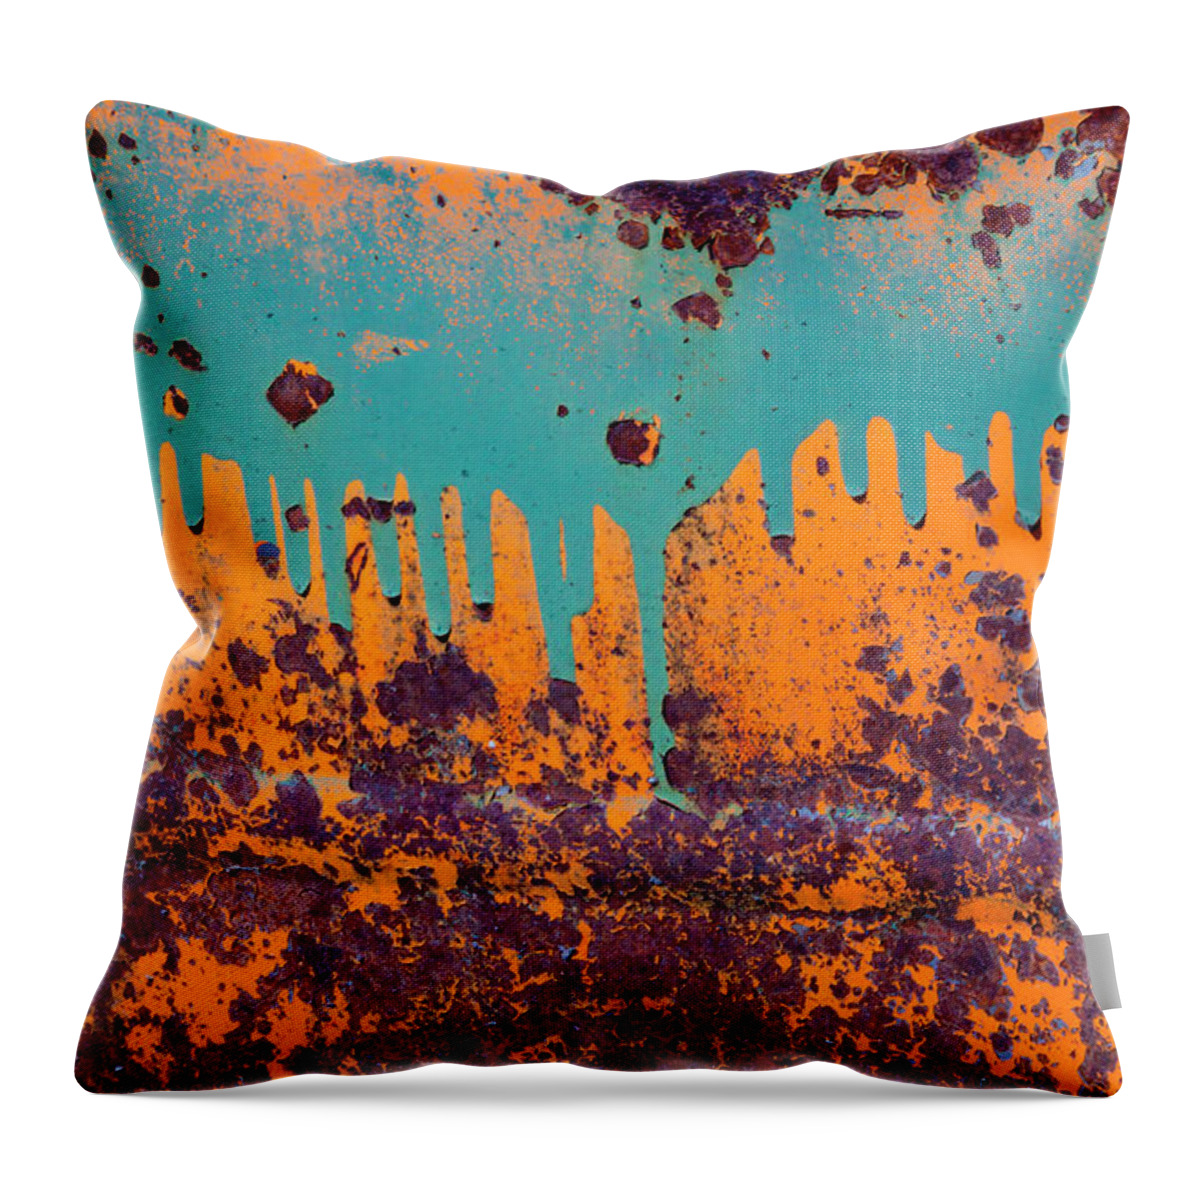 Vehicle Part Throw Pillow featuring the photograph Rusty Car Door, Shaniko, Oregon, Usa by Mint Images/ Art Wolfe